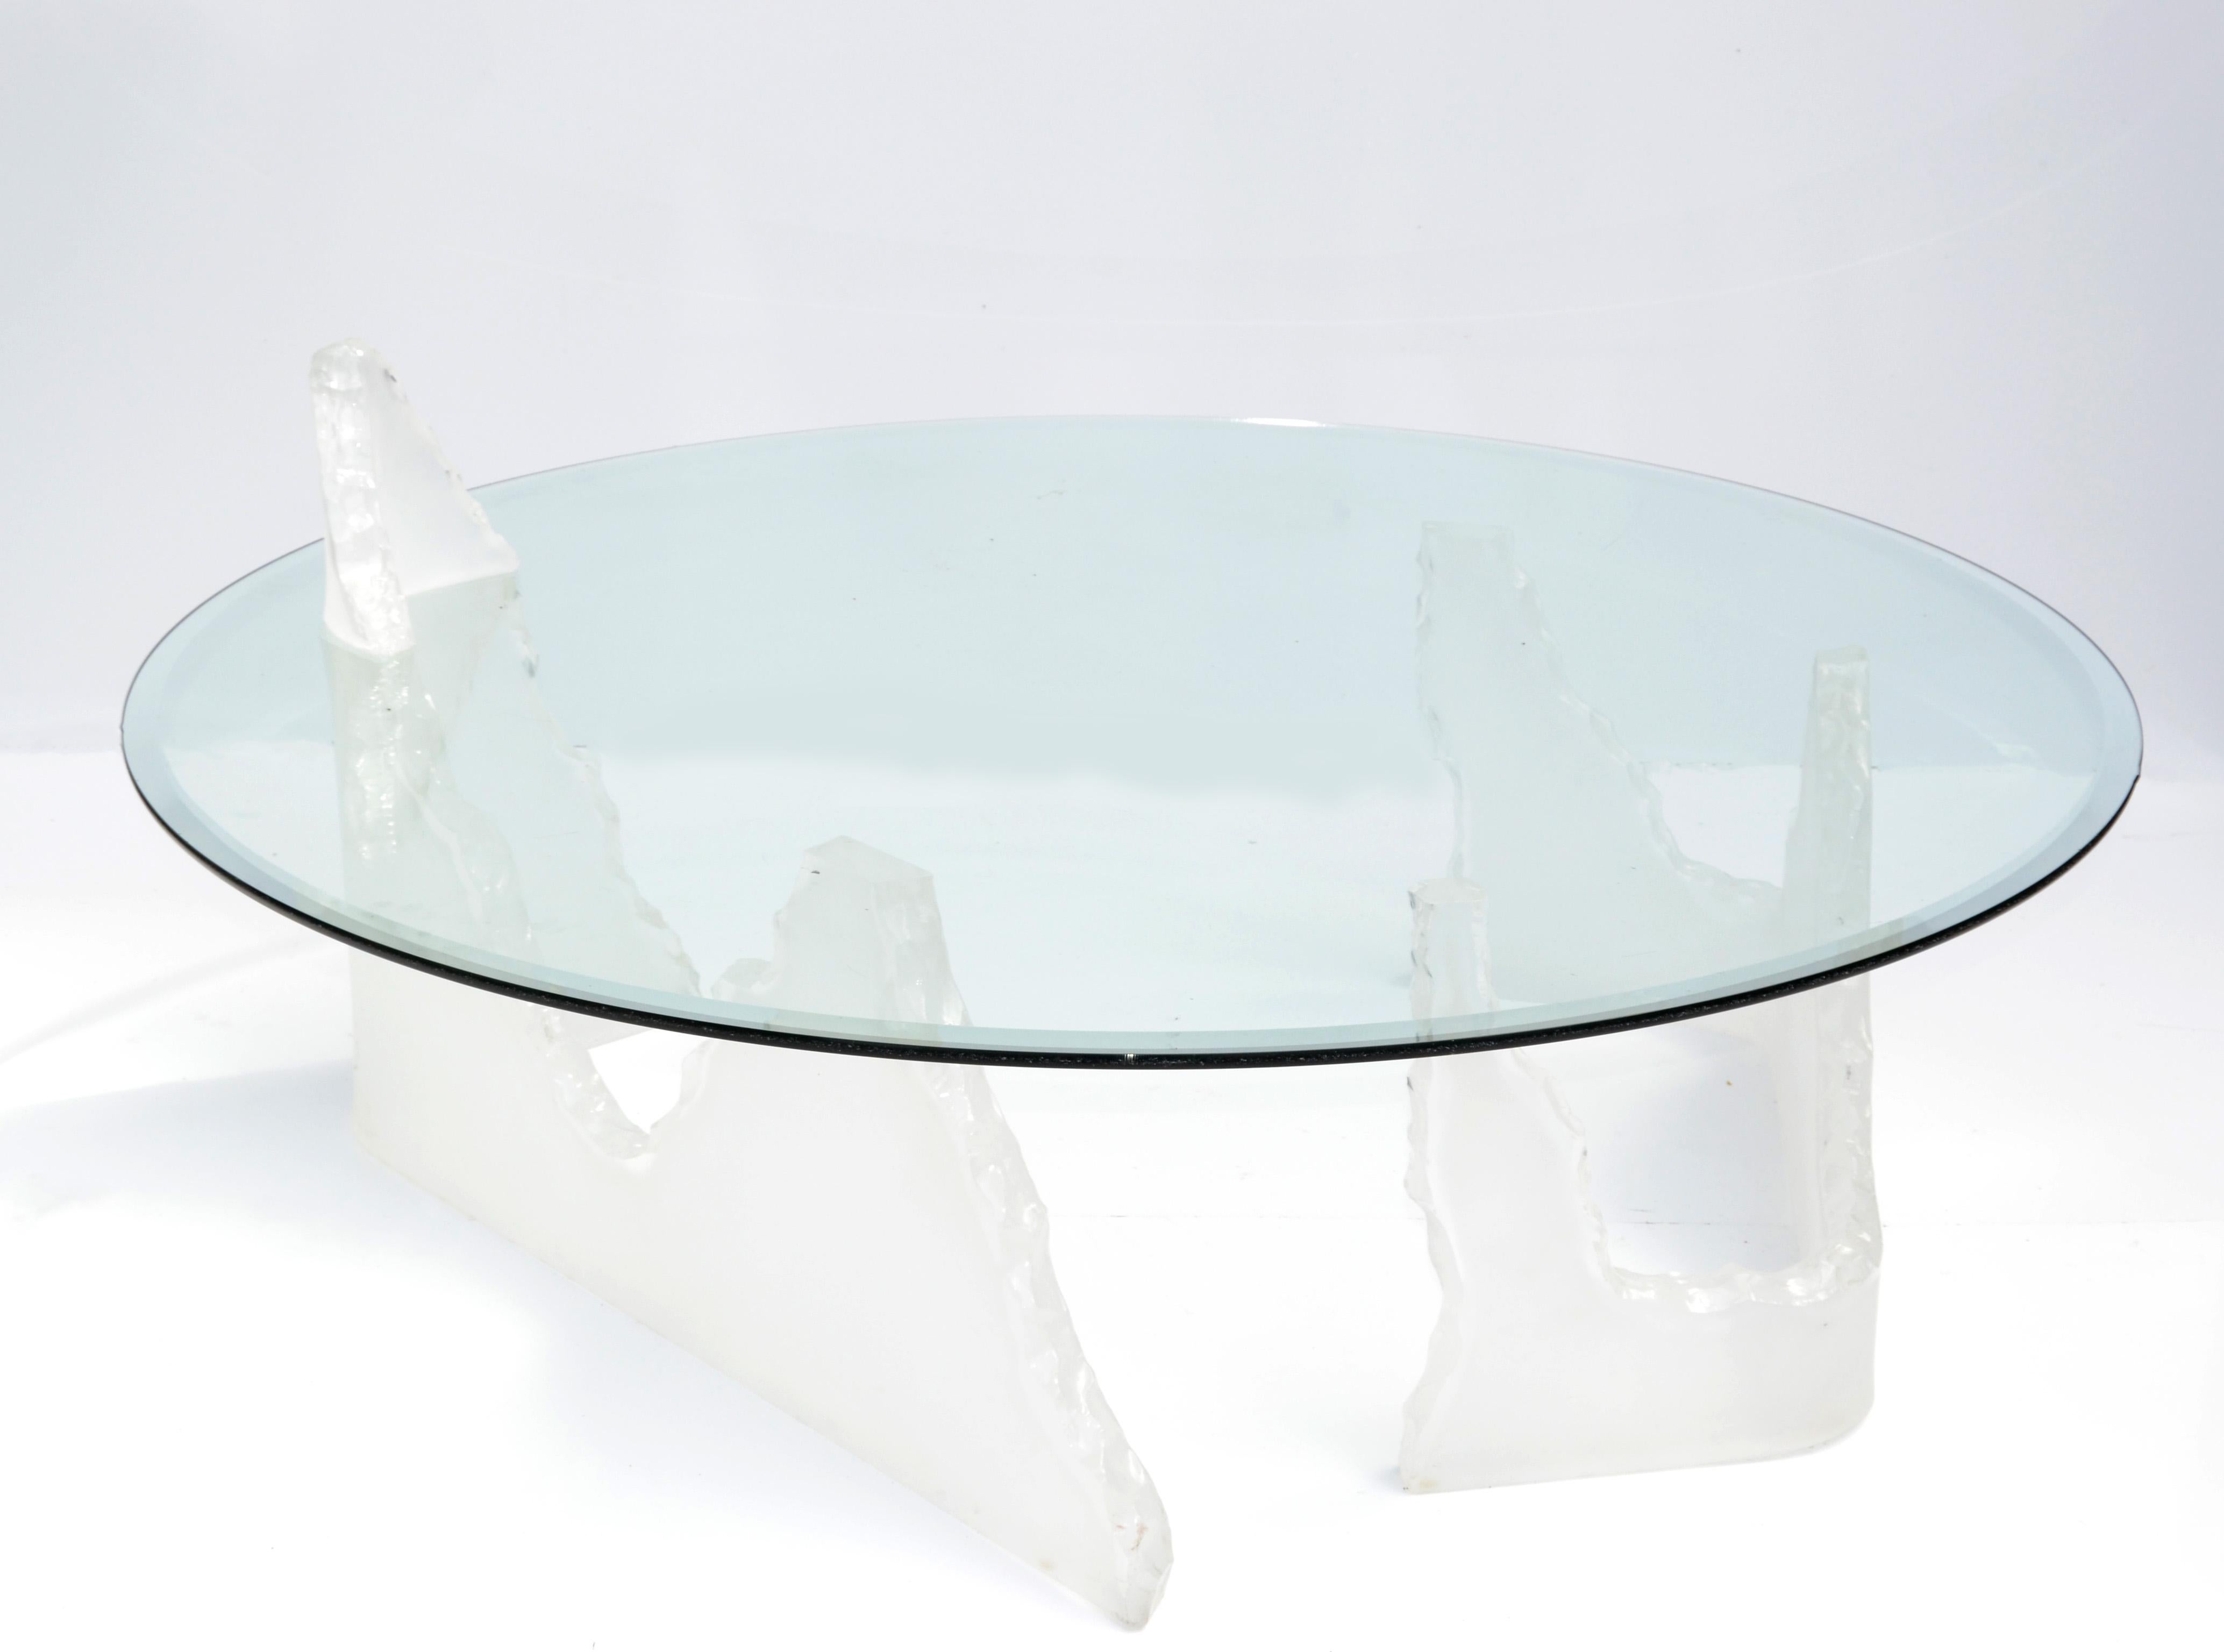 In the style of Lion in Frost is this impressive large round iceberg coffee or cocktail table.
Features two Lucite bases iceberg look with a Tip on Top and complimented by a round beveled glass top. 
Mid-Century Modern Design for any Interior.